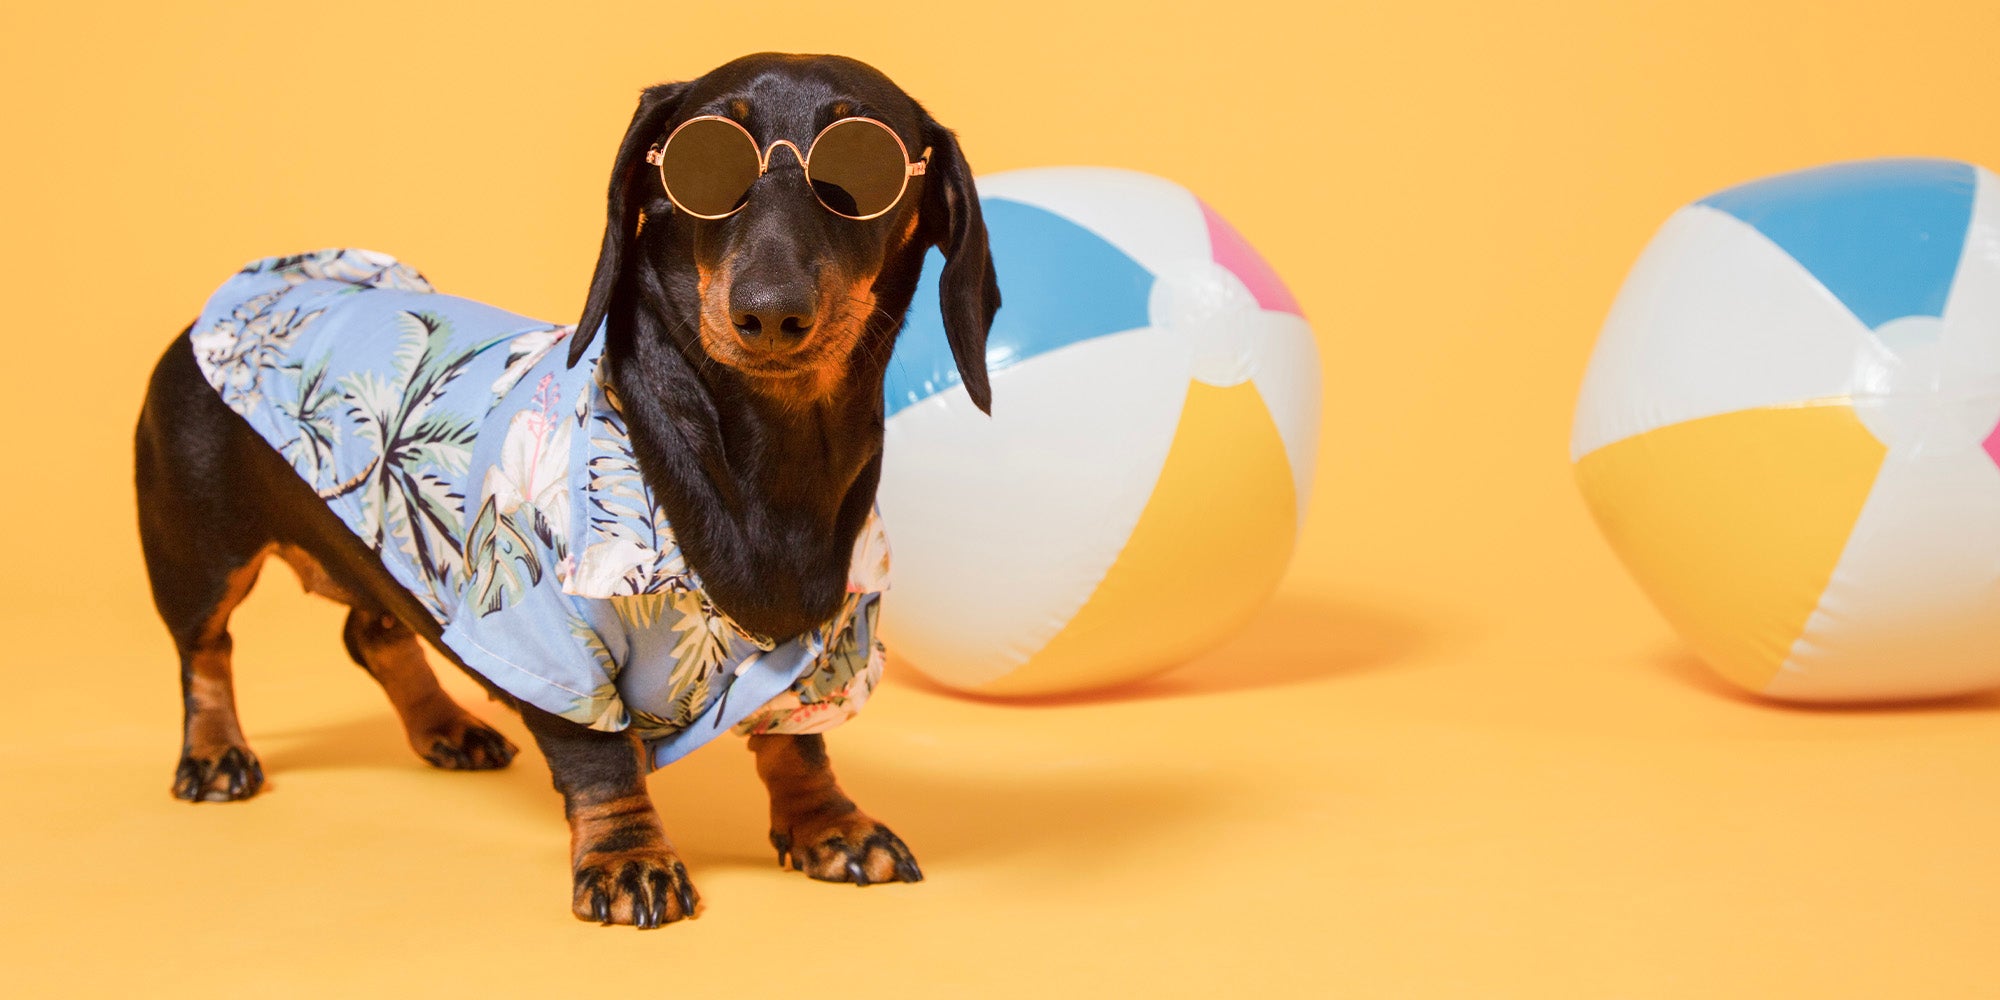 A brown and tan Dachshund dog, in a sun shirt and sunglasses with beach balls, against a pale orange background